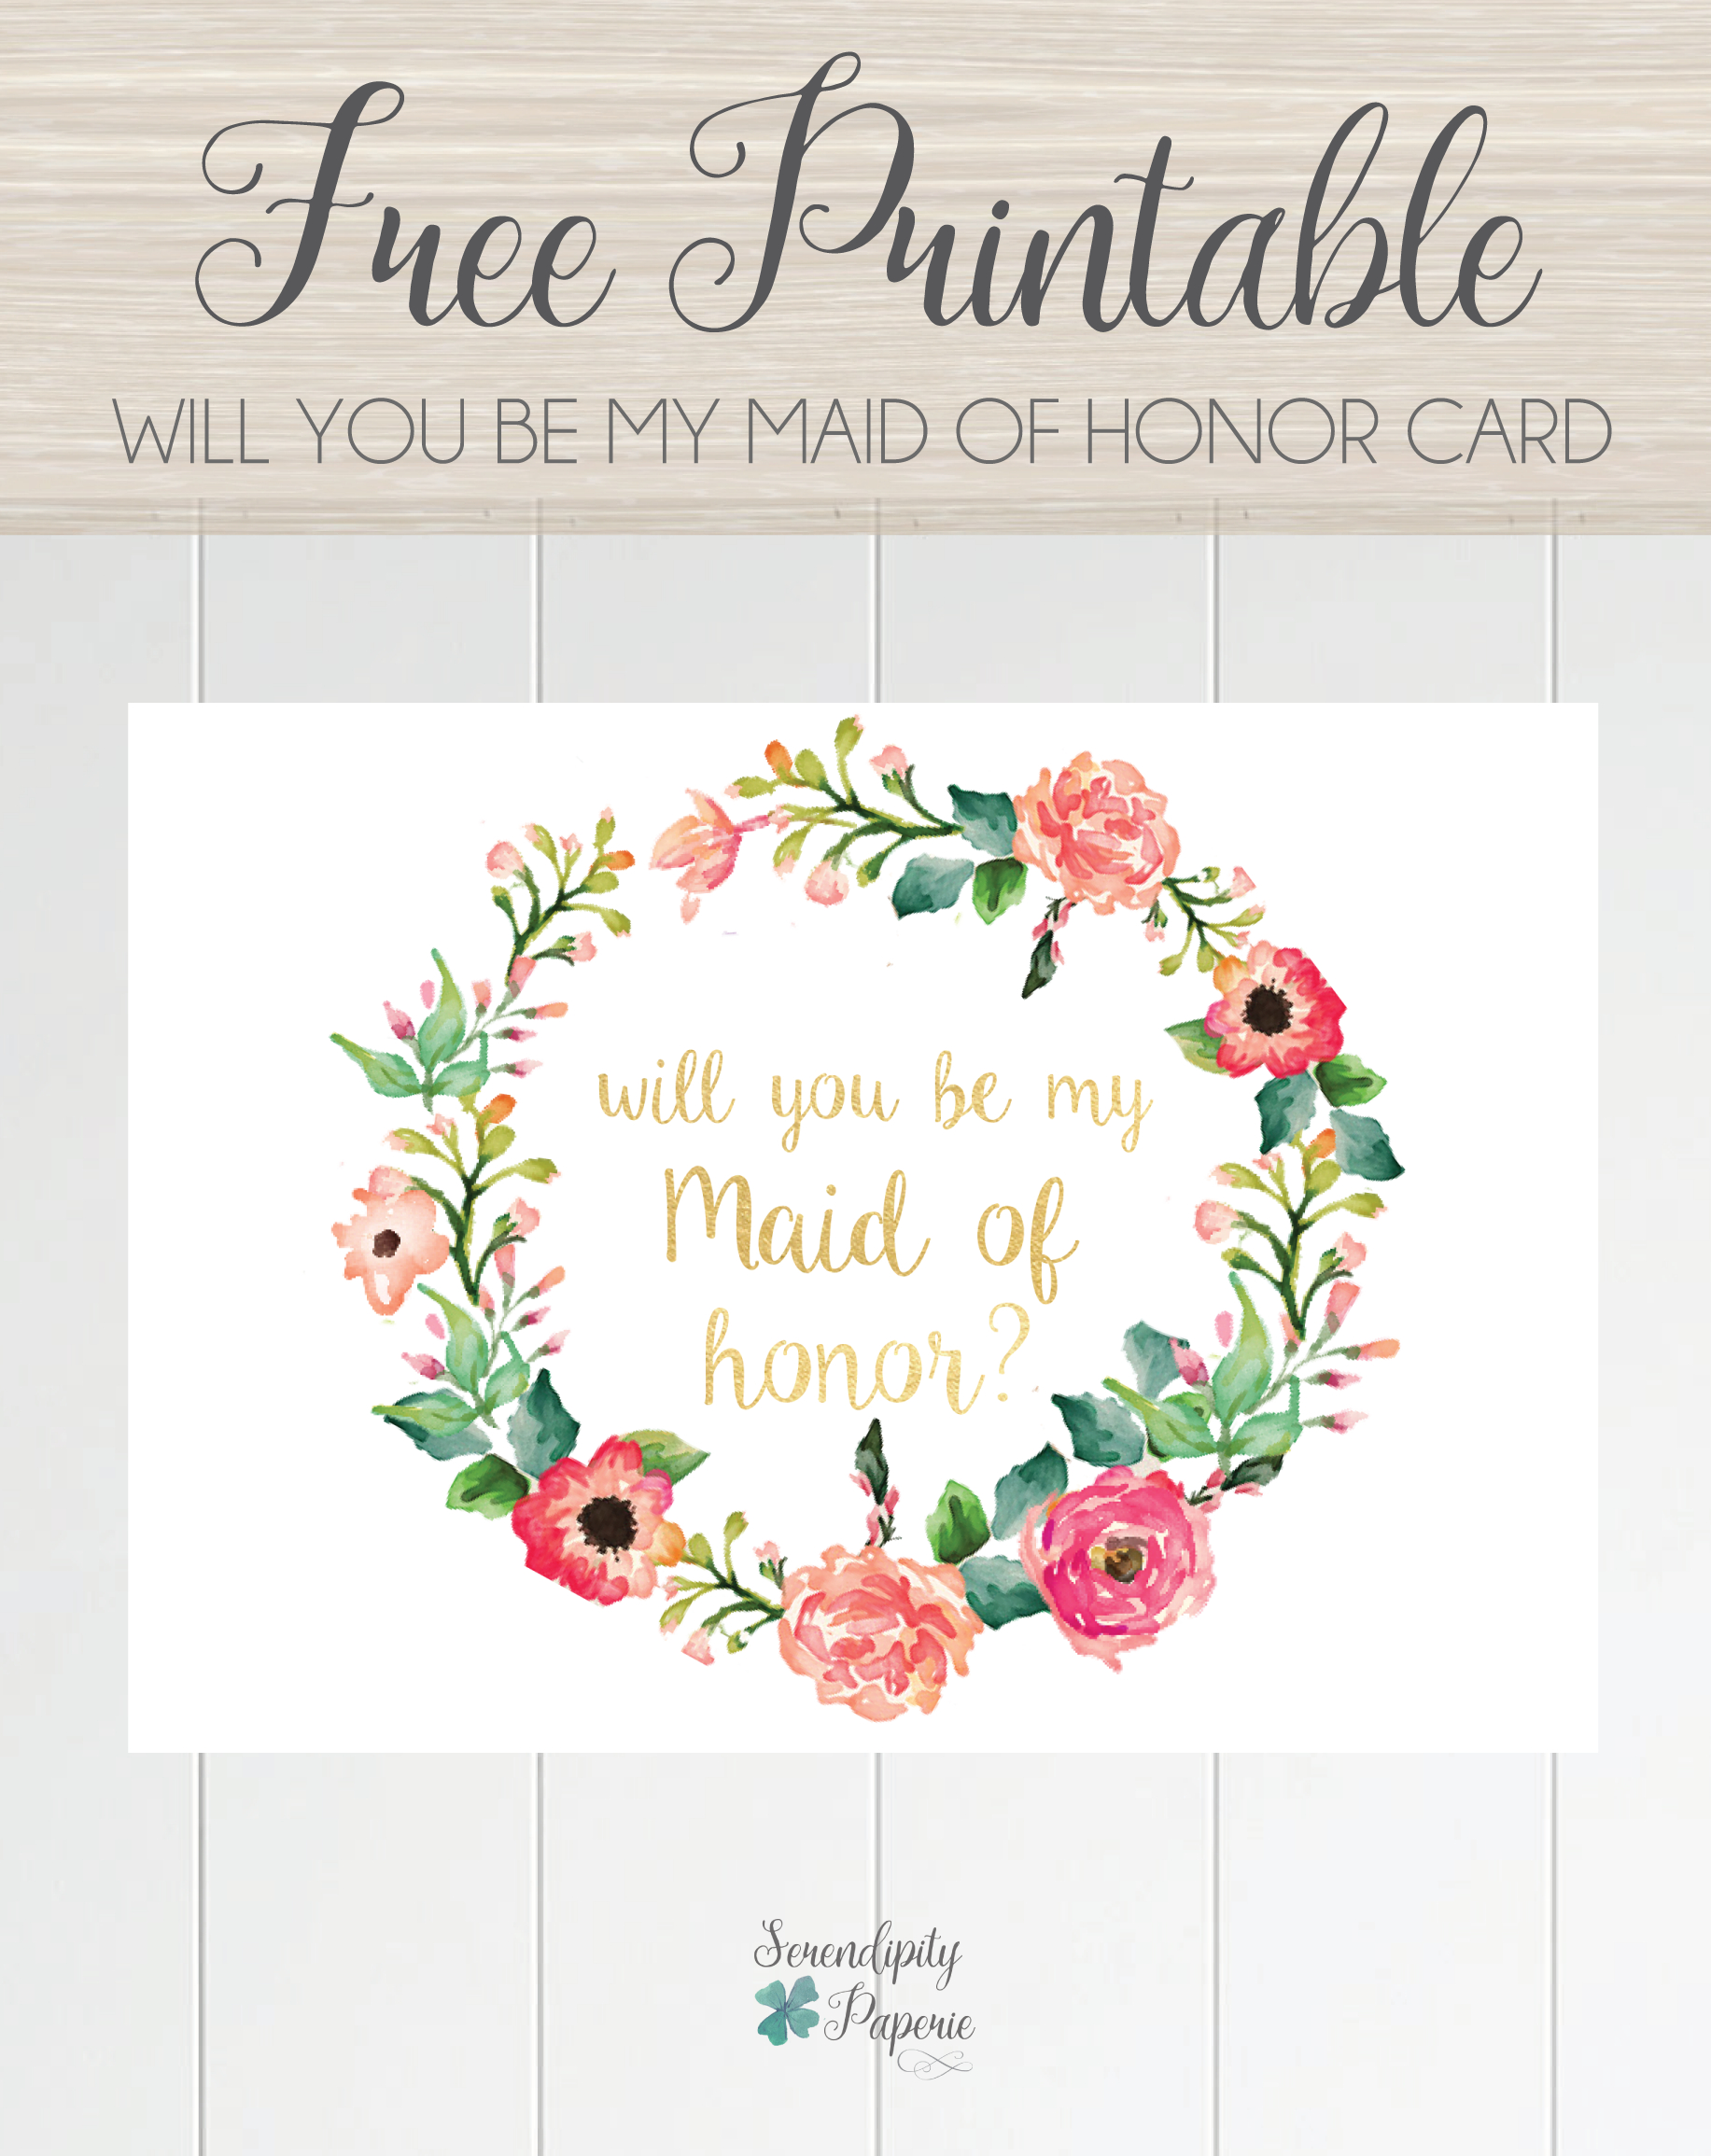 Free Printable Will You Be My Maid Of Honor Card, Floral Wreath - Free Printable Will You Be My Bridesmaid Cards